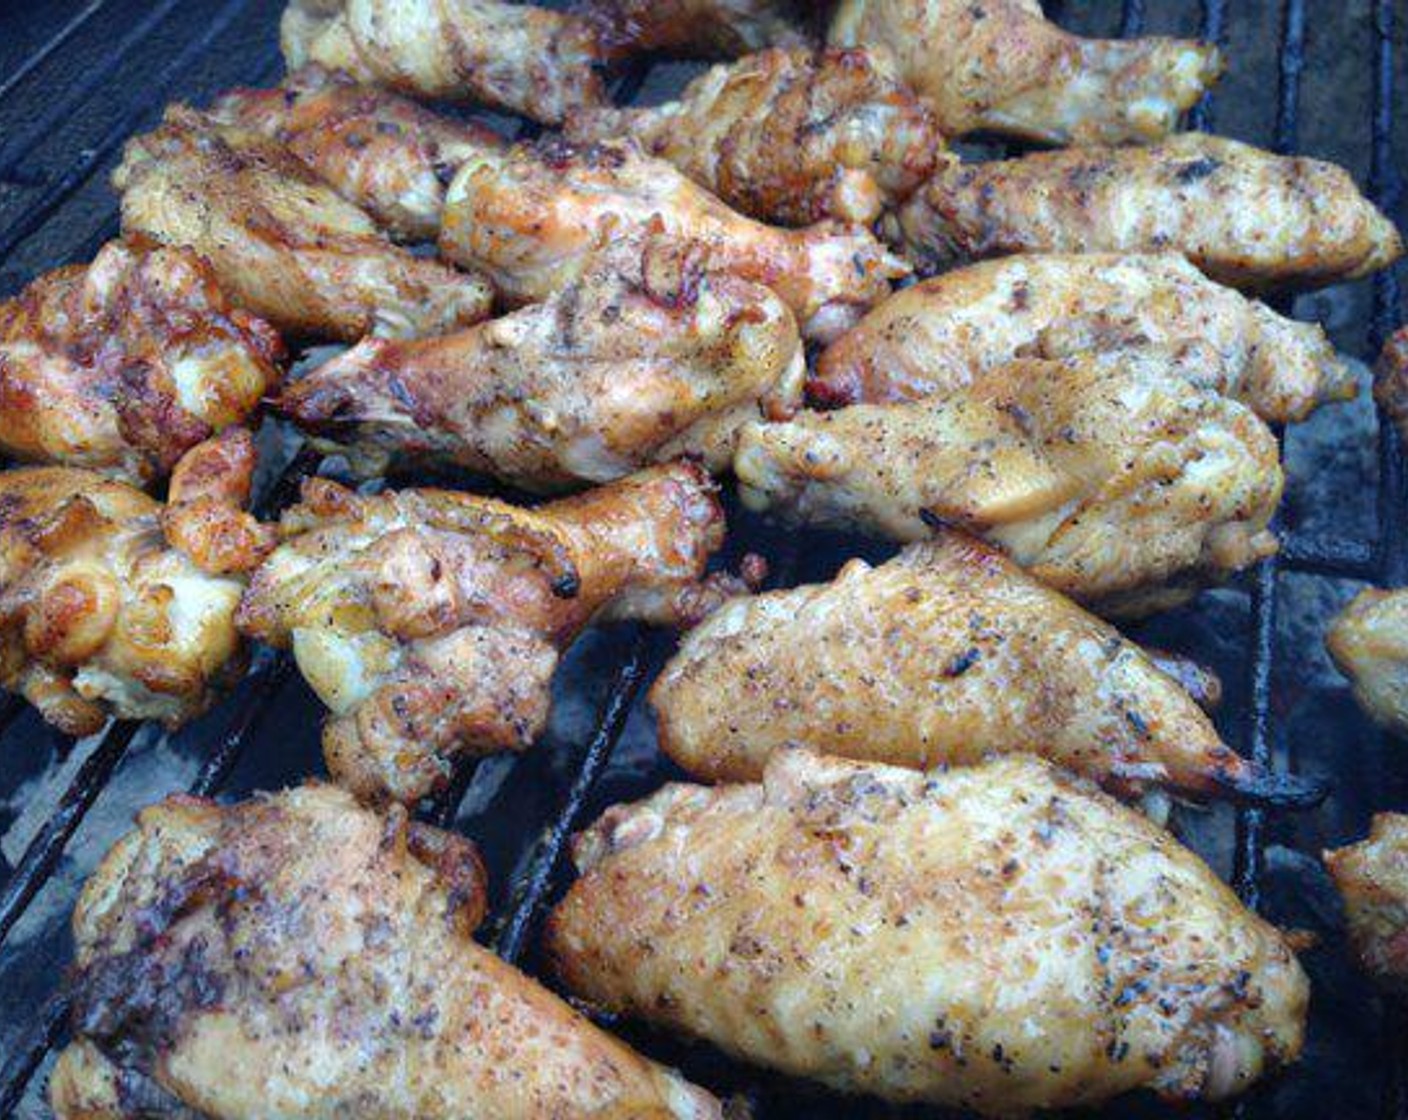 step 7 Let the grill temperature settle, it needs to be about 350-375 degrees F (176-190 degrees C) for wings, medium-high heat. Arrange the wing pieces on the grate and set a timer for 4 minutes. Check the wings for color and flip them after 4 minutes.